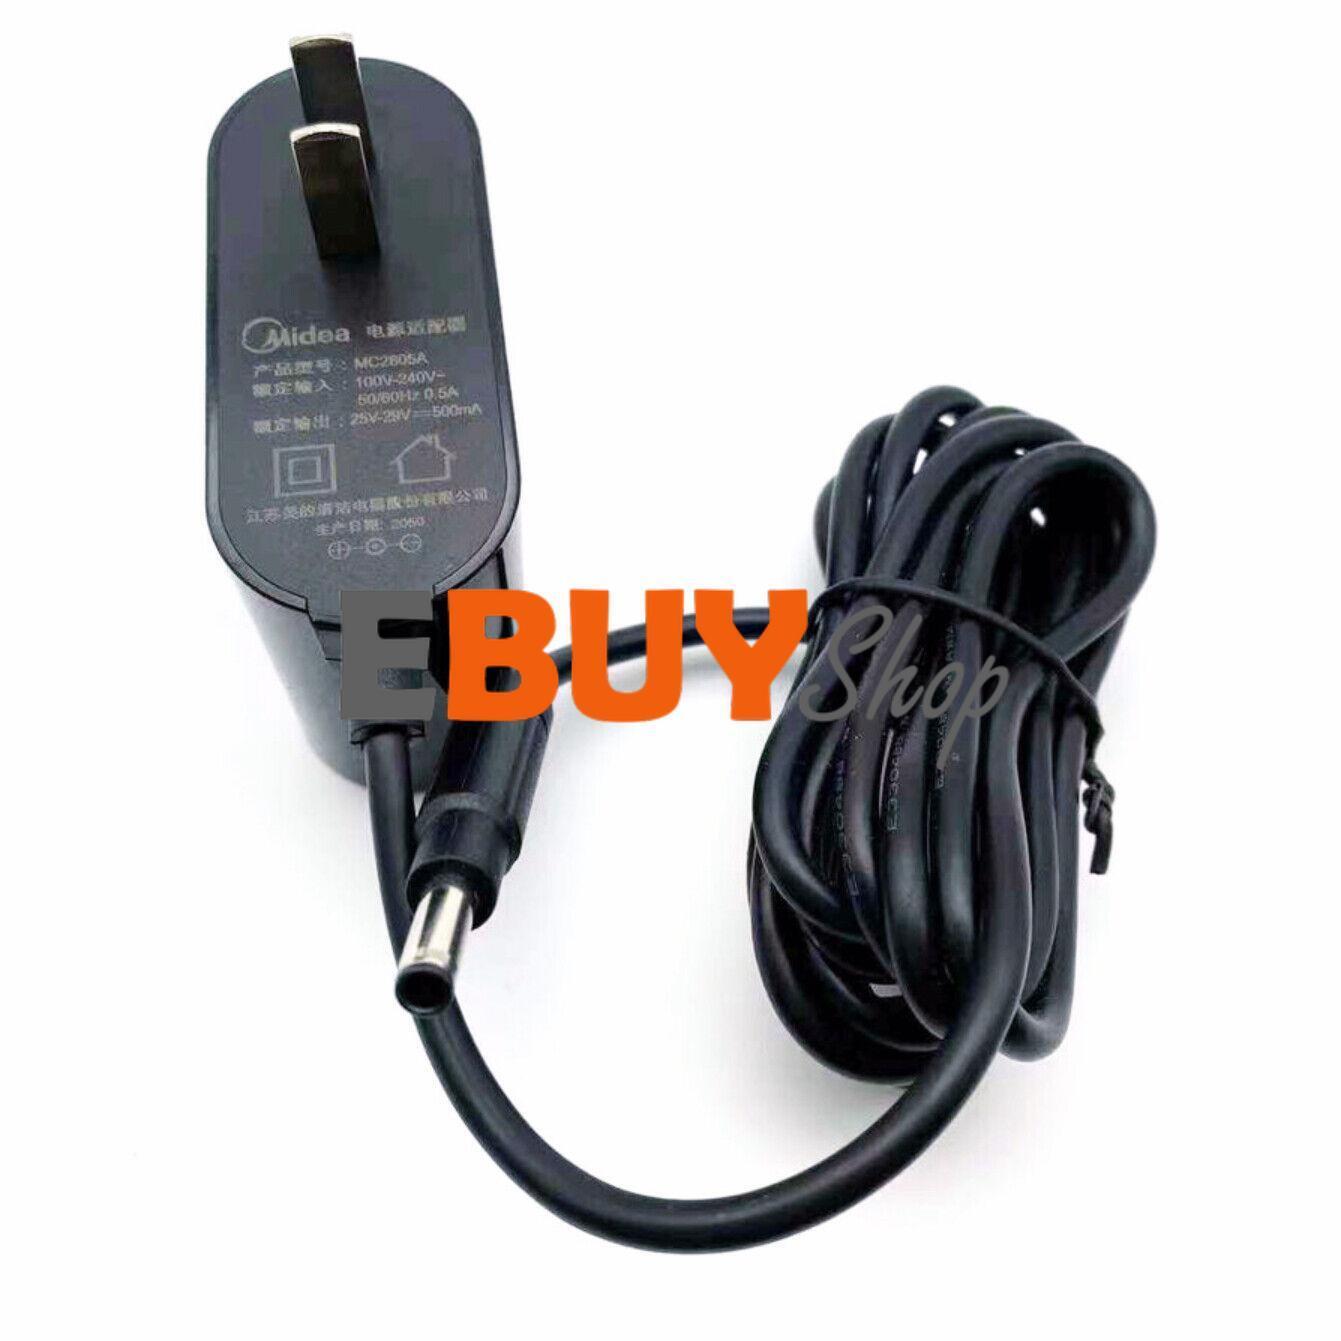 Midea MC2805A 25V-29V 500MA AC Power Adapter Qty:1pc Brand Unbranded Type AC/AC Adapter Custom Bundle No MPN Does Not A